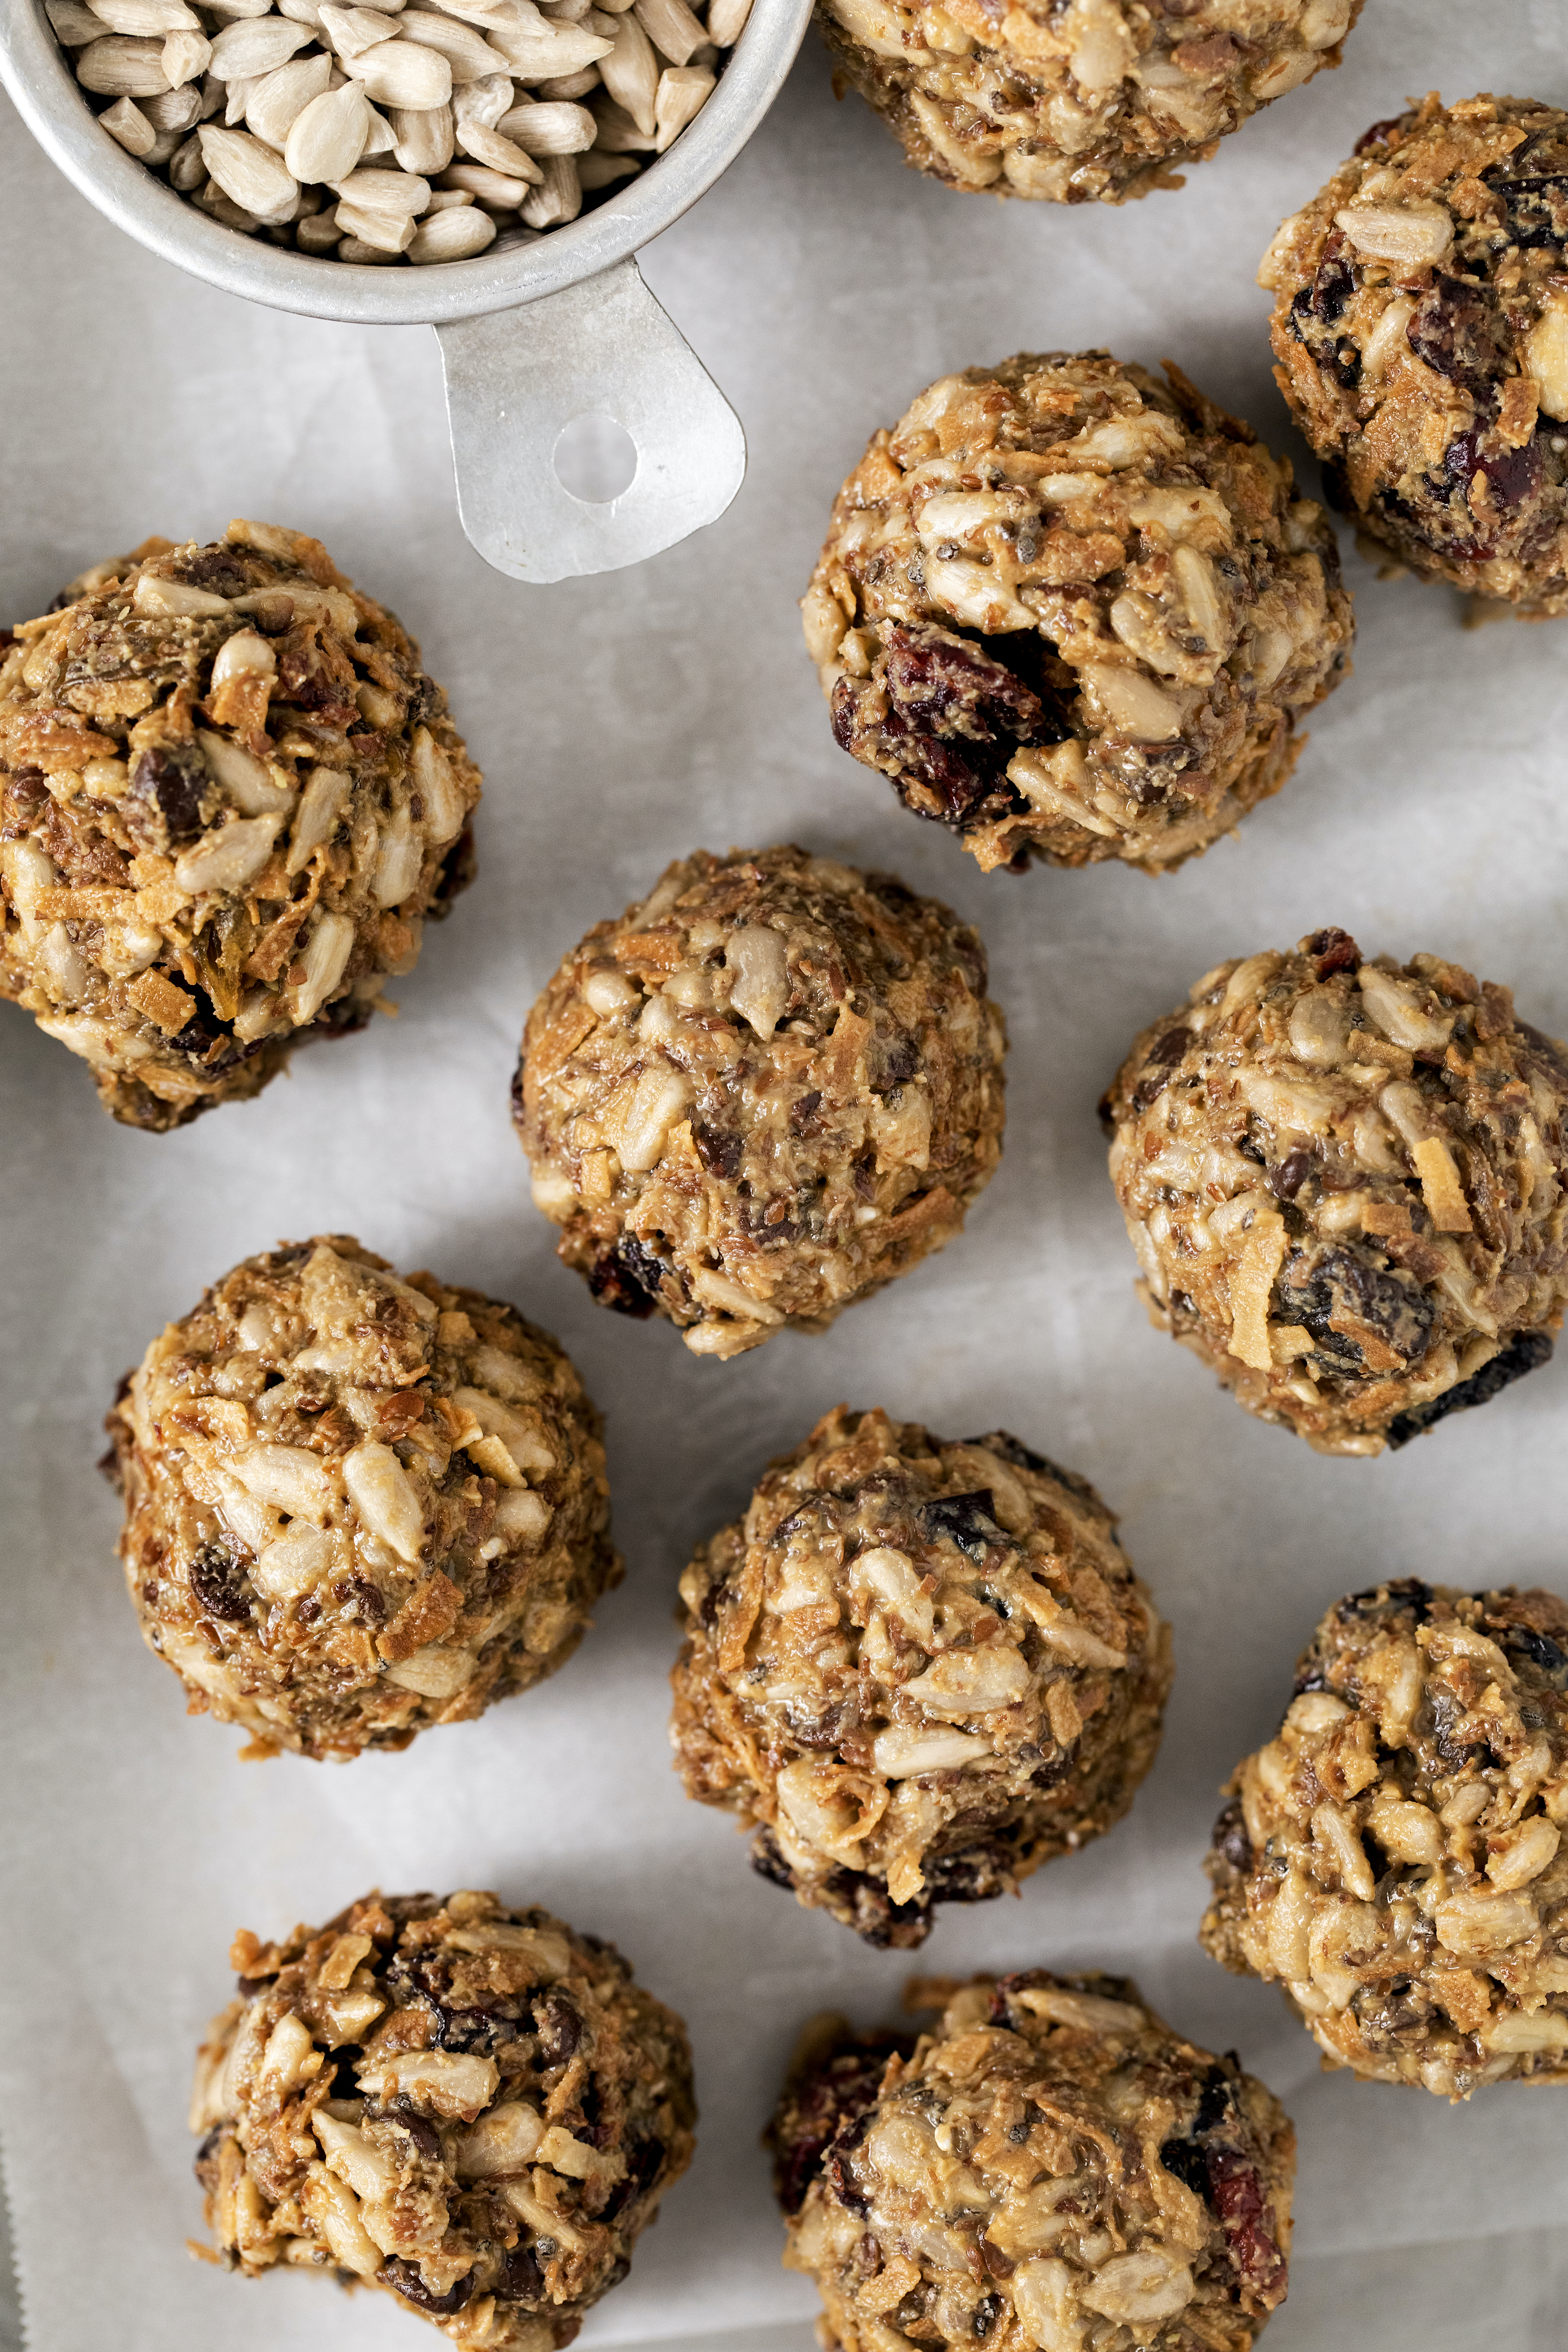 Delicious Nut Free Energy Balls to pack